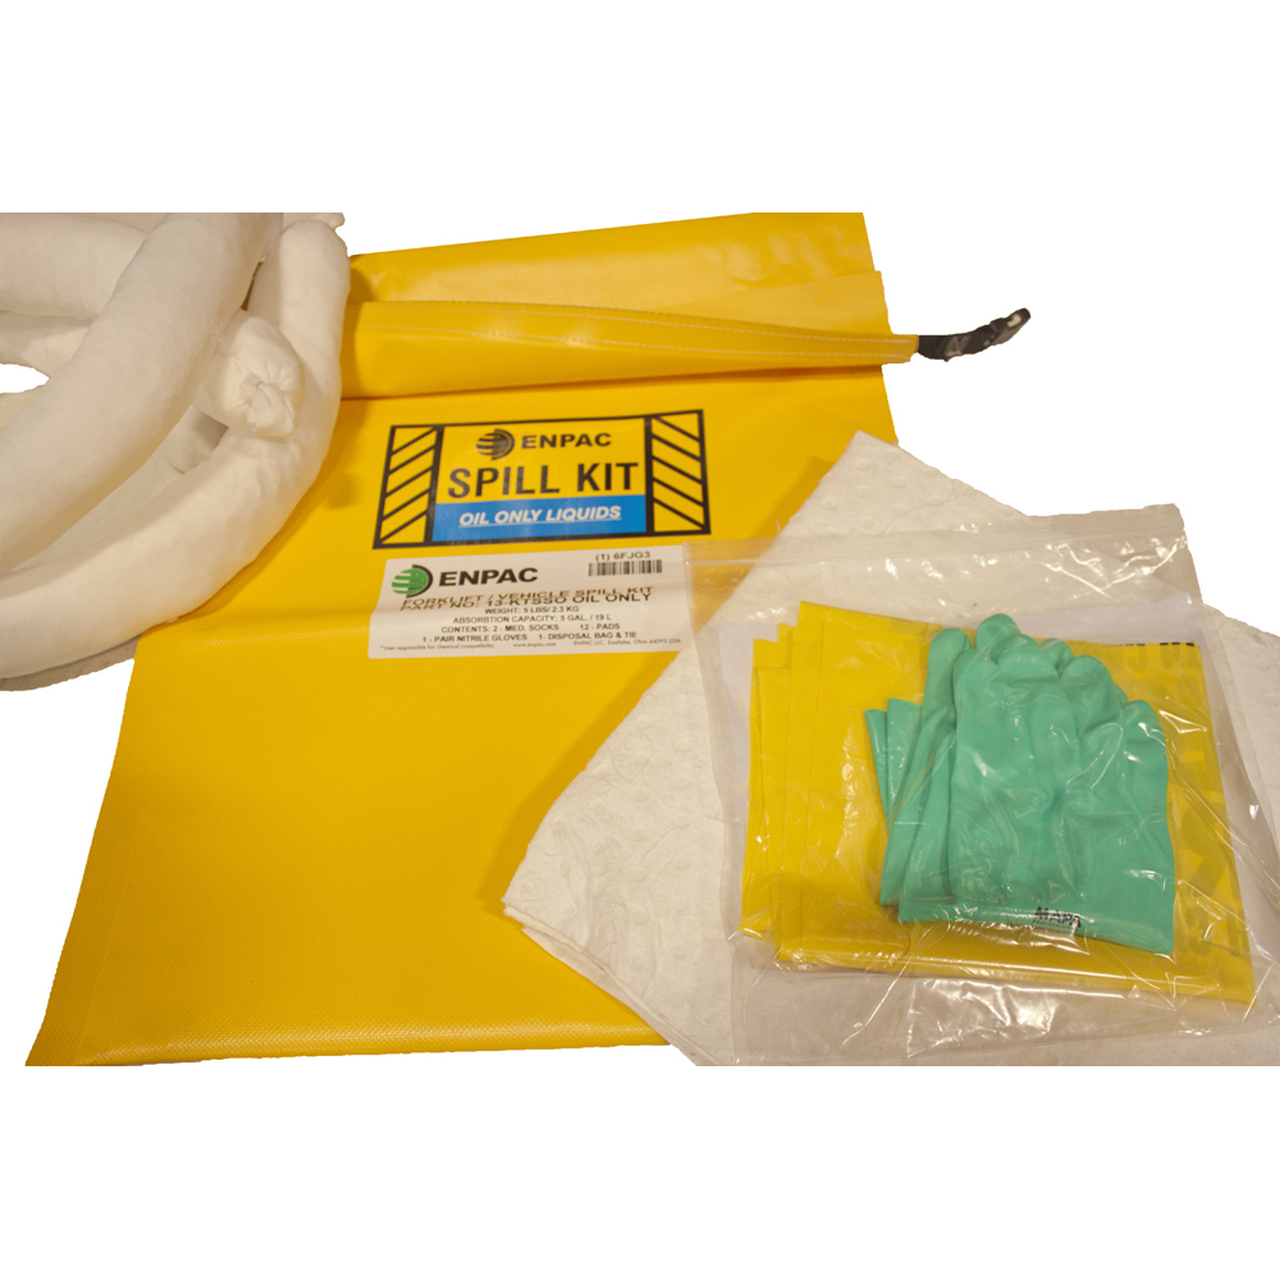 LabSource - Full-line Distributor of Lab and Safety Products Specializing  in Gloves, Disposable Protective Apparel and Laborator